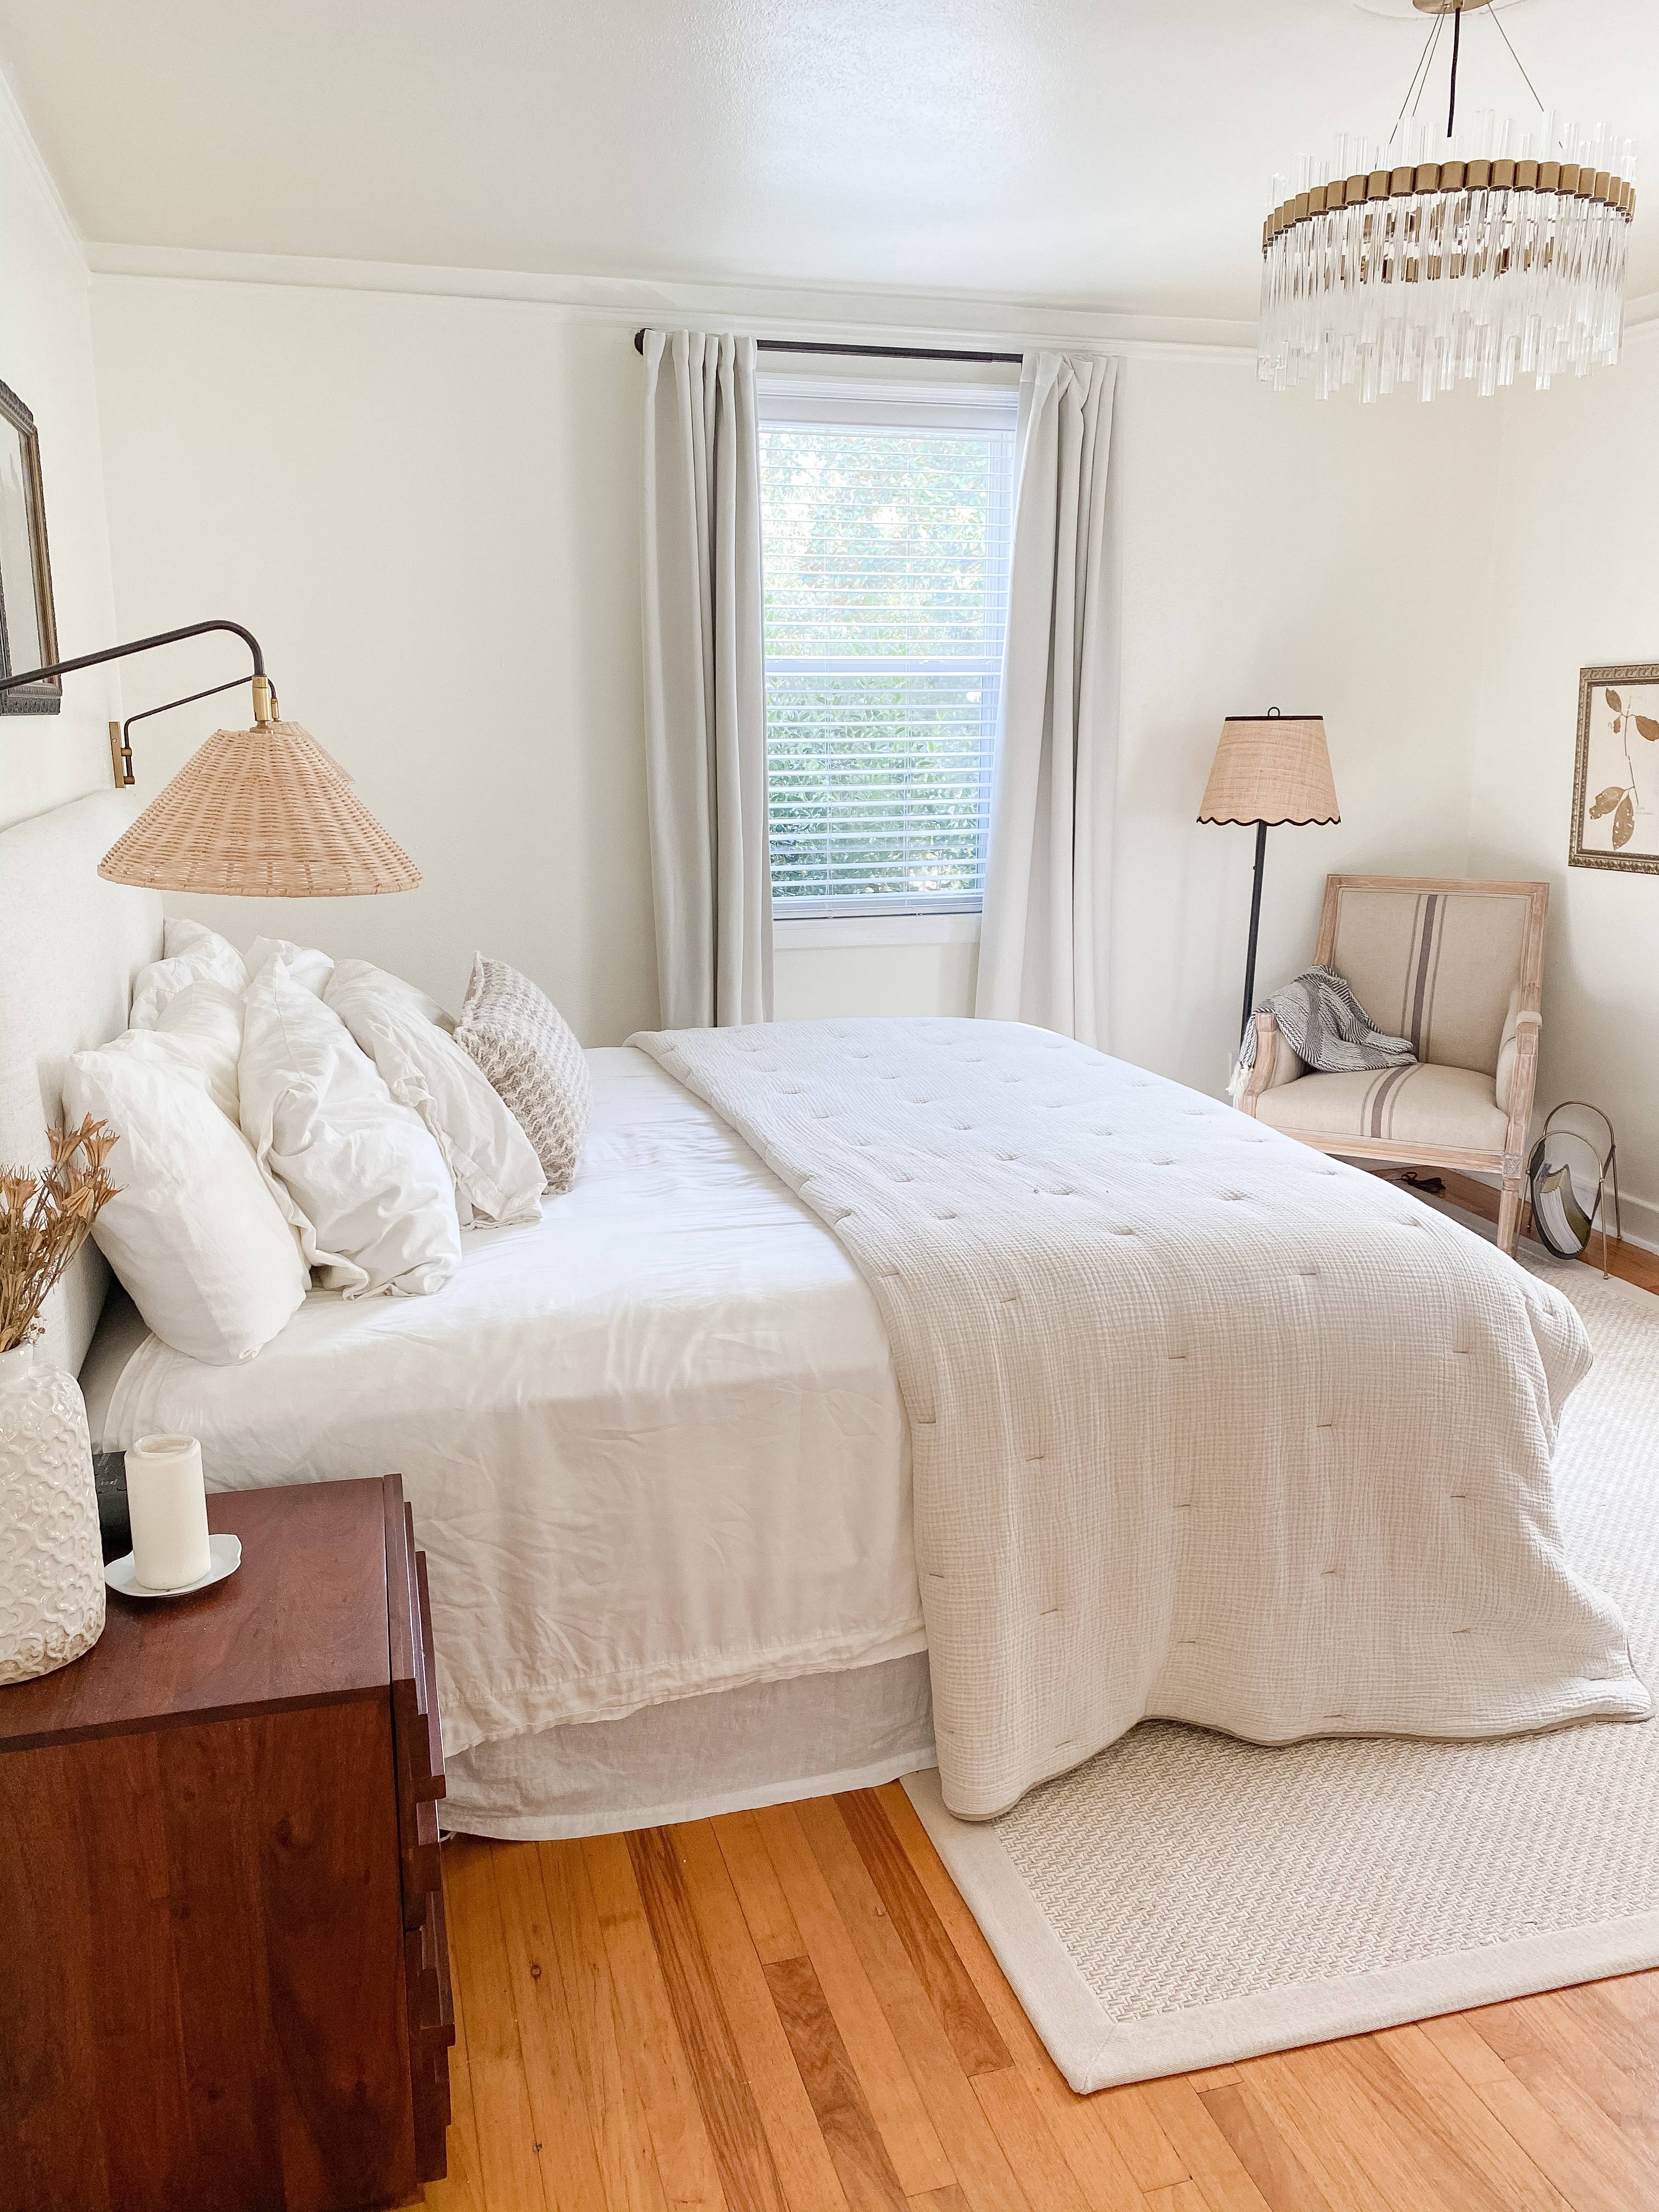 Get the Look: Our Master Bedroom